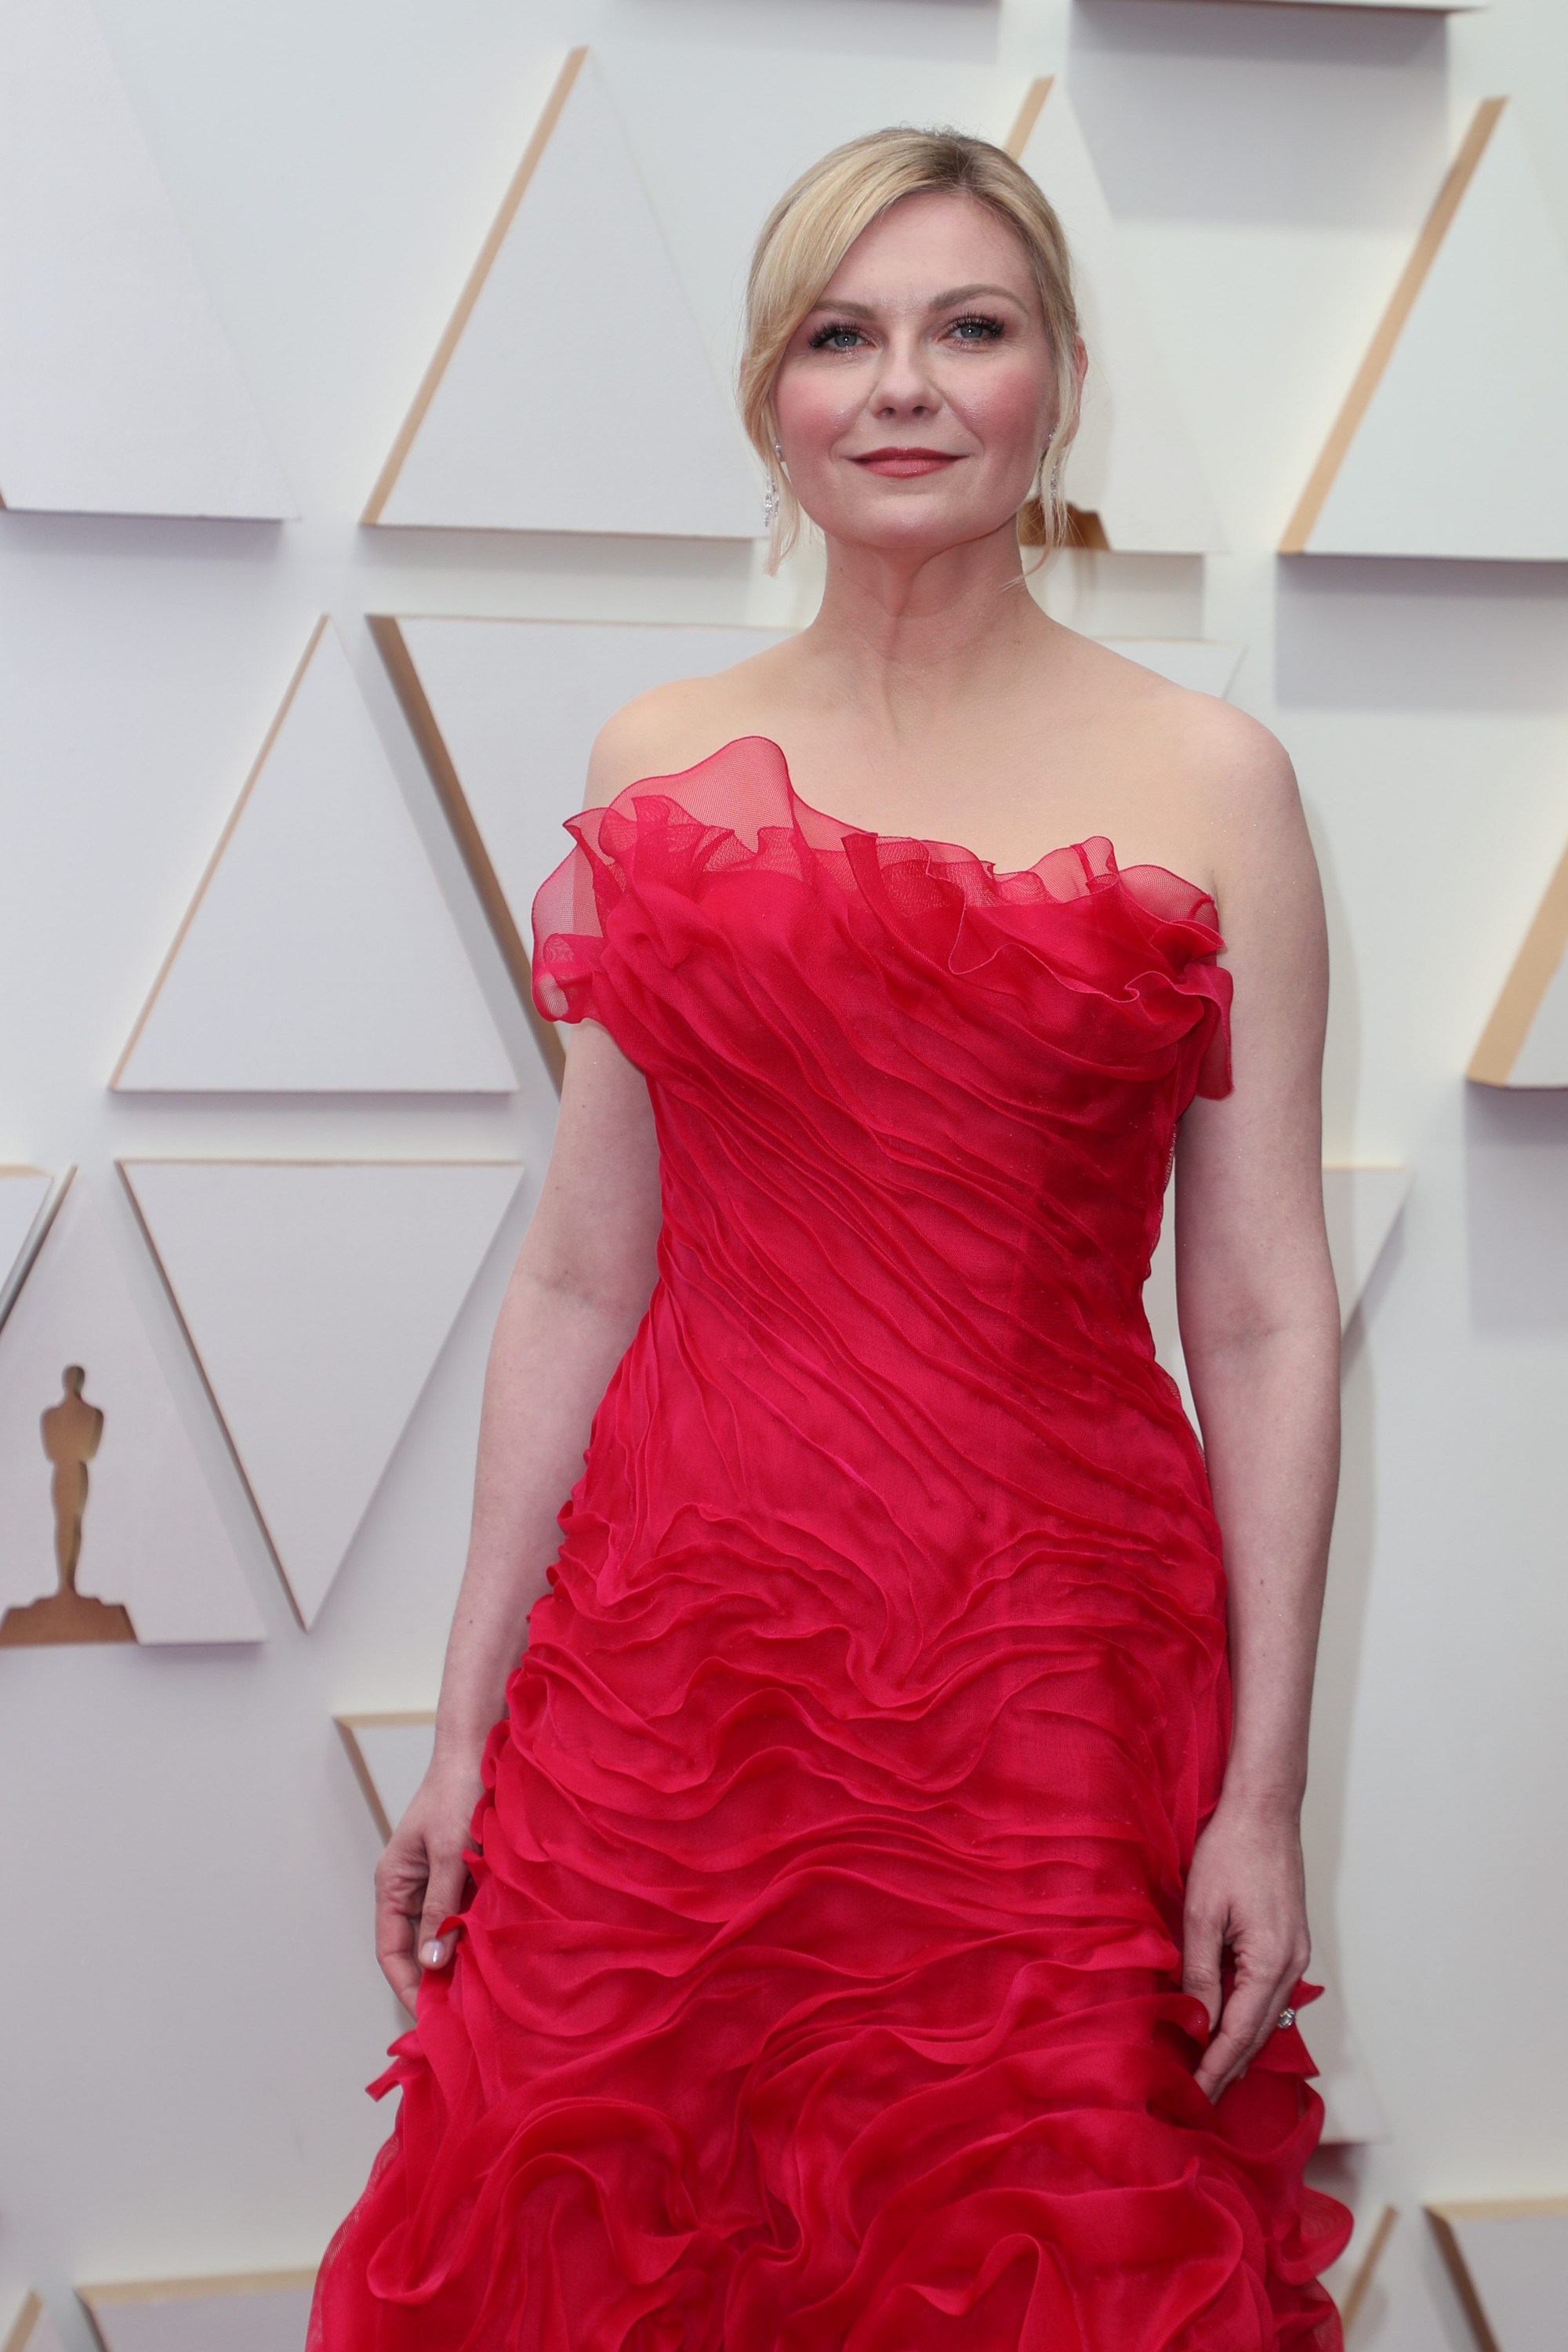 THE OSCARS®  The 94th Oscars® aired live Sunday March 27, from the Dolby® Theatre at Ovation Hollywood at 8 p.m. EDT/5 p.m. PDT on ABC in more than 200 territories worldwide. (ABC via Getty Images)KIRSTEN DUNST (Foto: ABC via Getty Images)